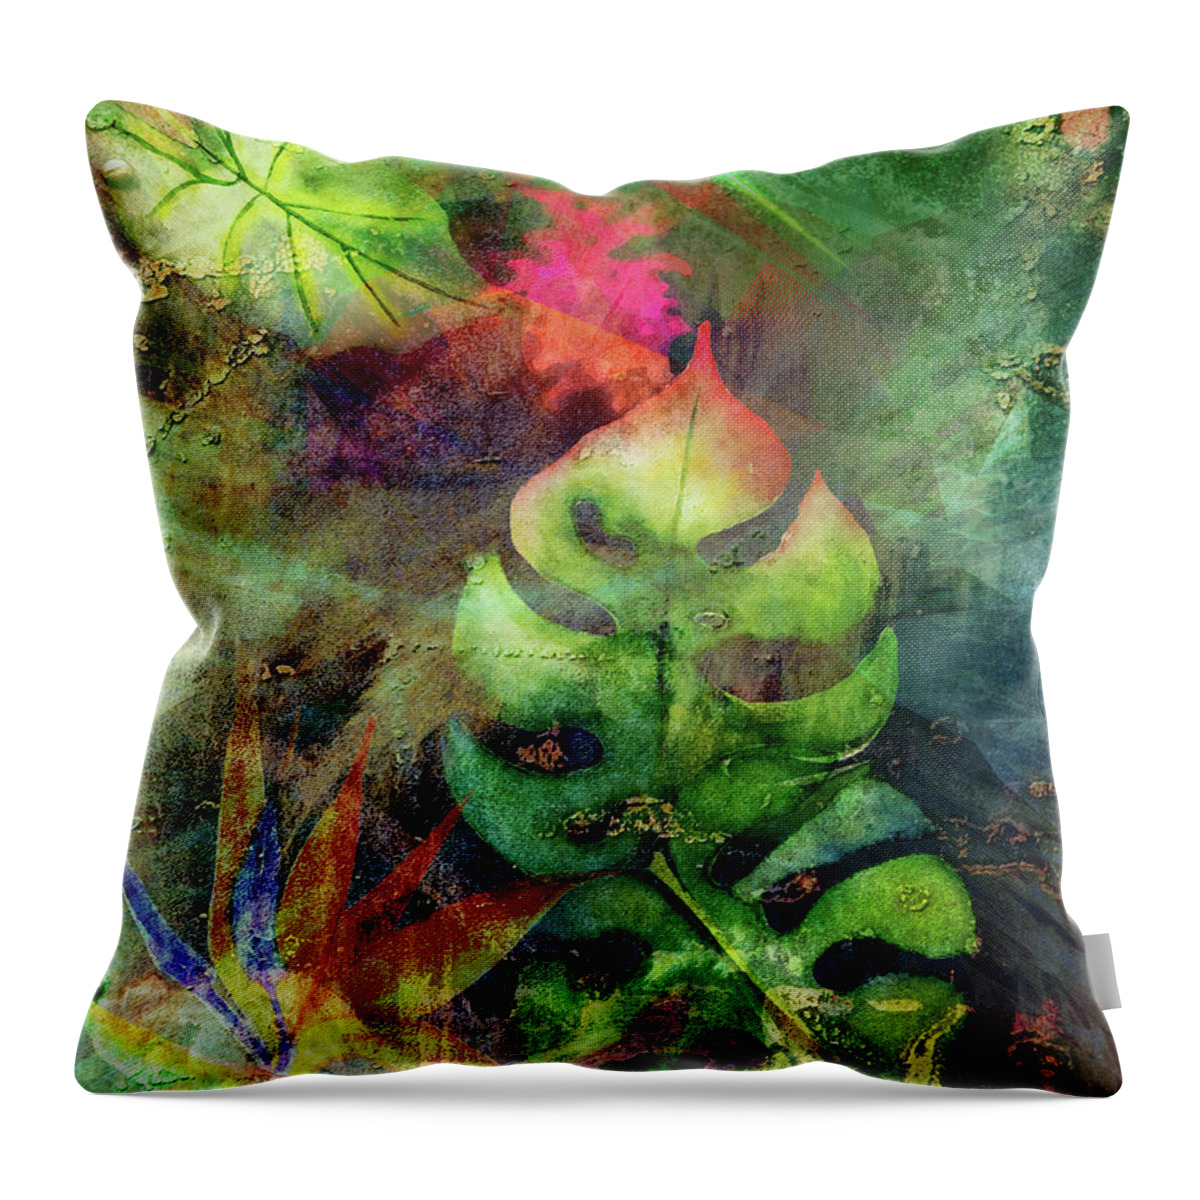 Maelstrom Throw Pillow featuring the digital art Maelstrom by Linda Carruth